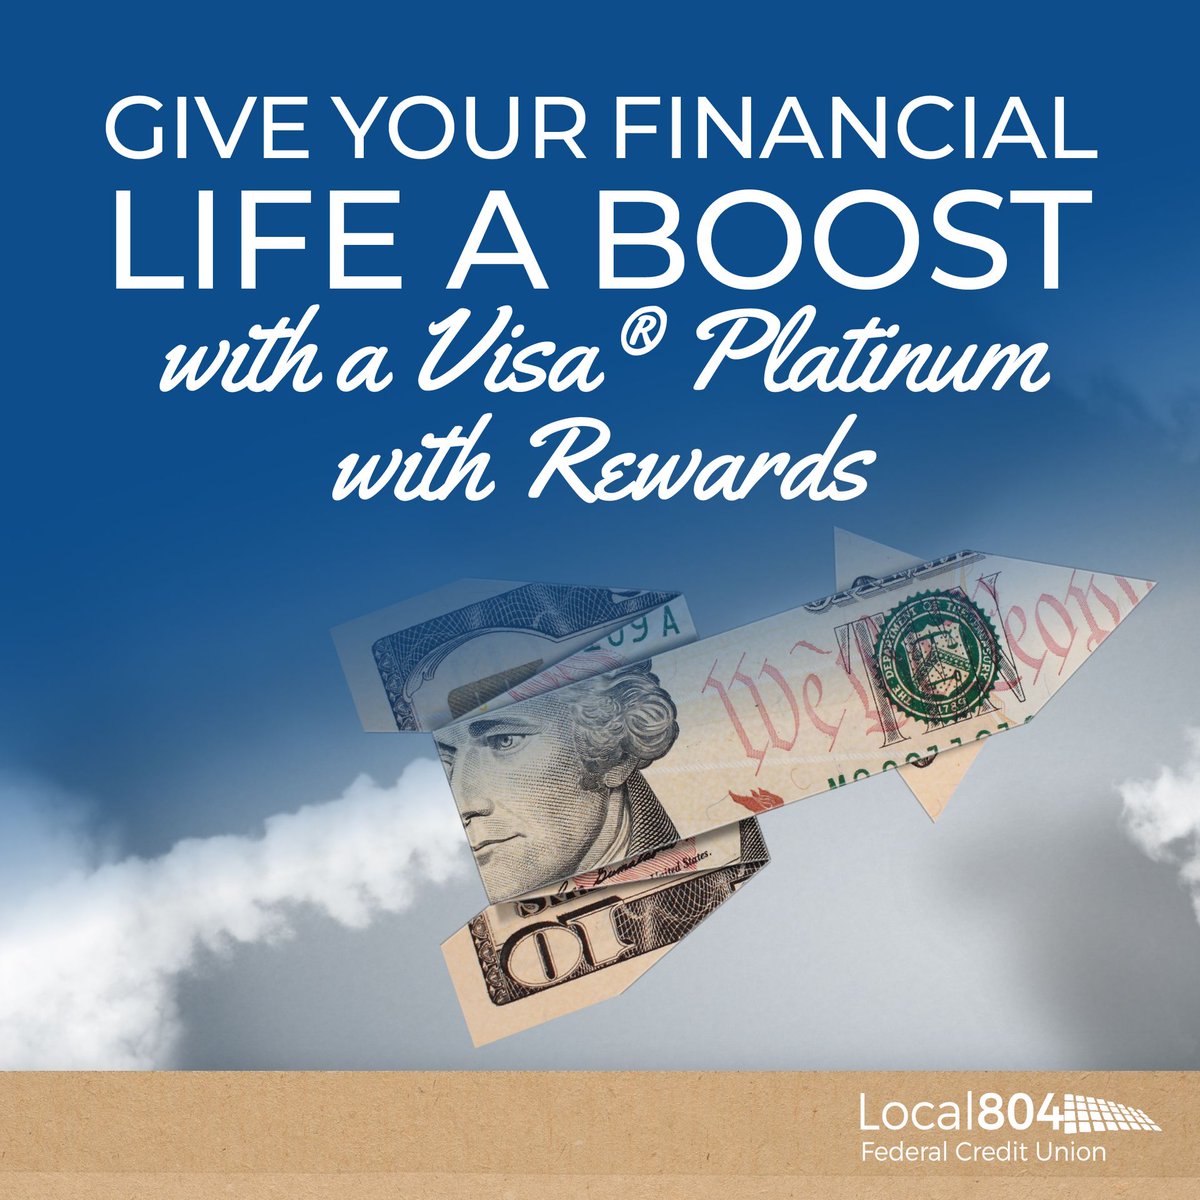 Earn Points with Local 804 FCU Visa® Platinum with Rewards Learn more! bit.ly/3TRAzRU

#TeamstersLocal804 #Teamsters #UPS #local447IAMAW @Teamsters_Local_804 @804_Local